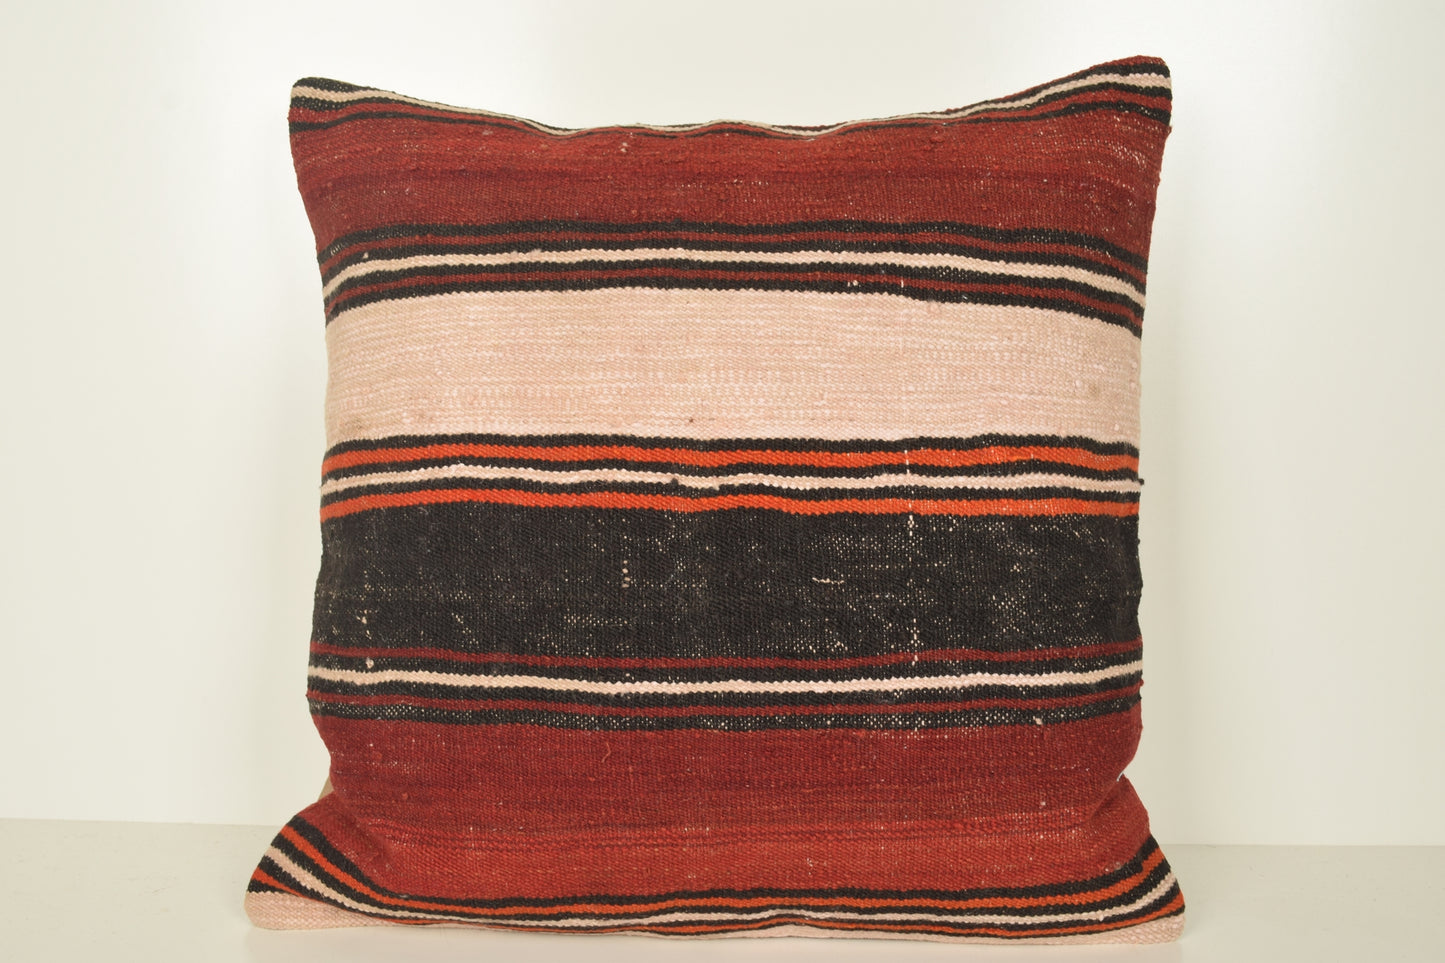 Kilim Pillow Urban Outfitters A00990 24x24 Craft Northern Low-priced